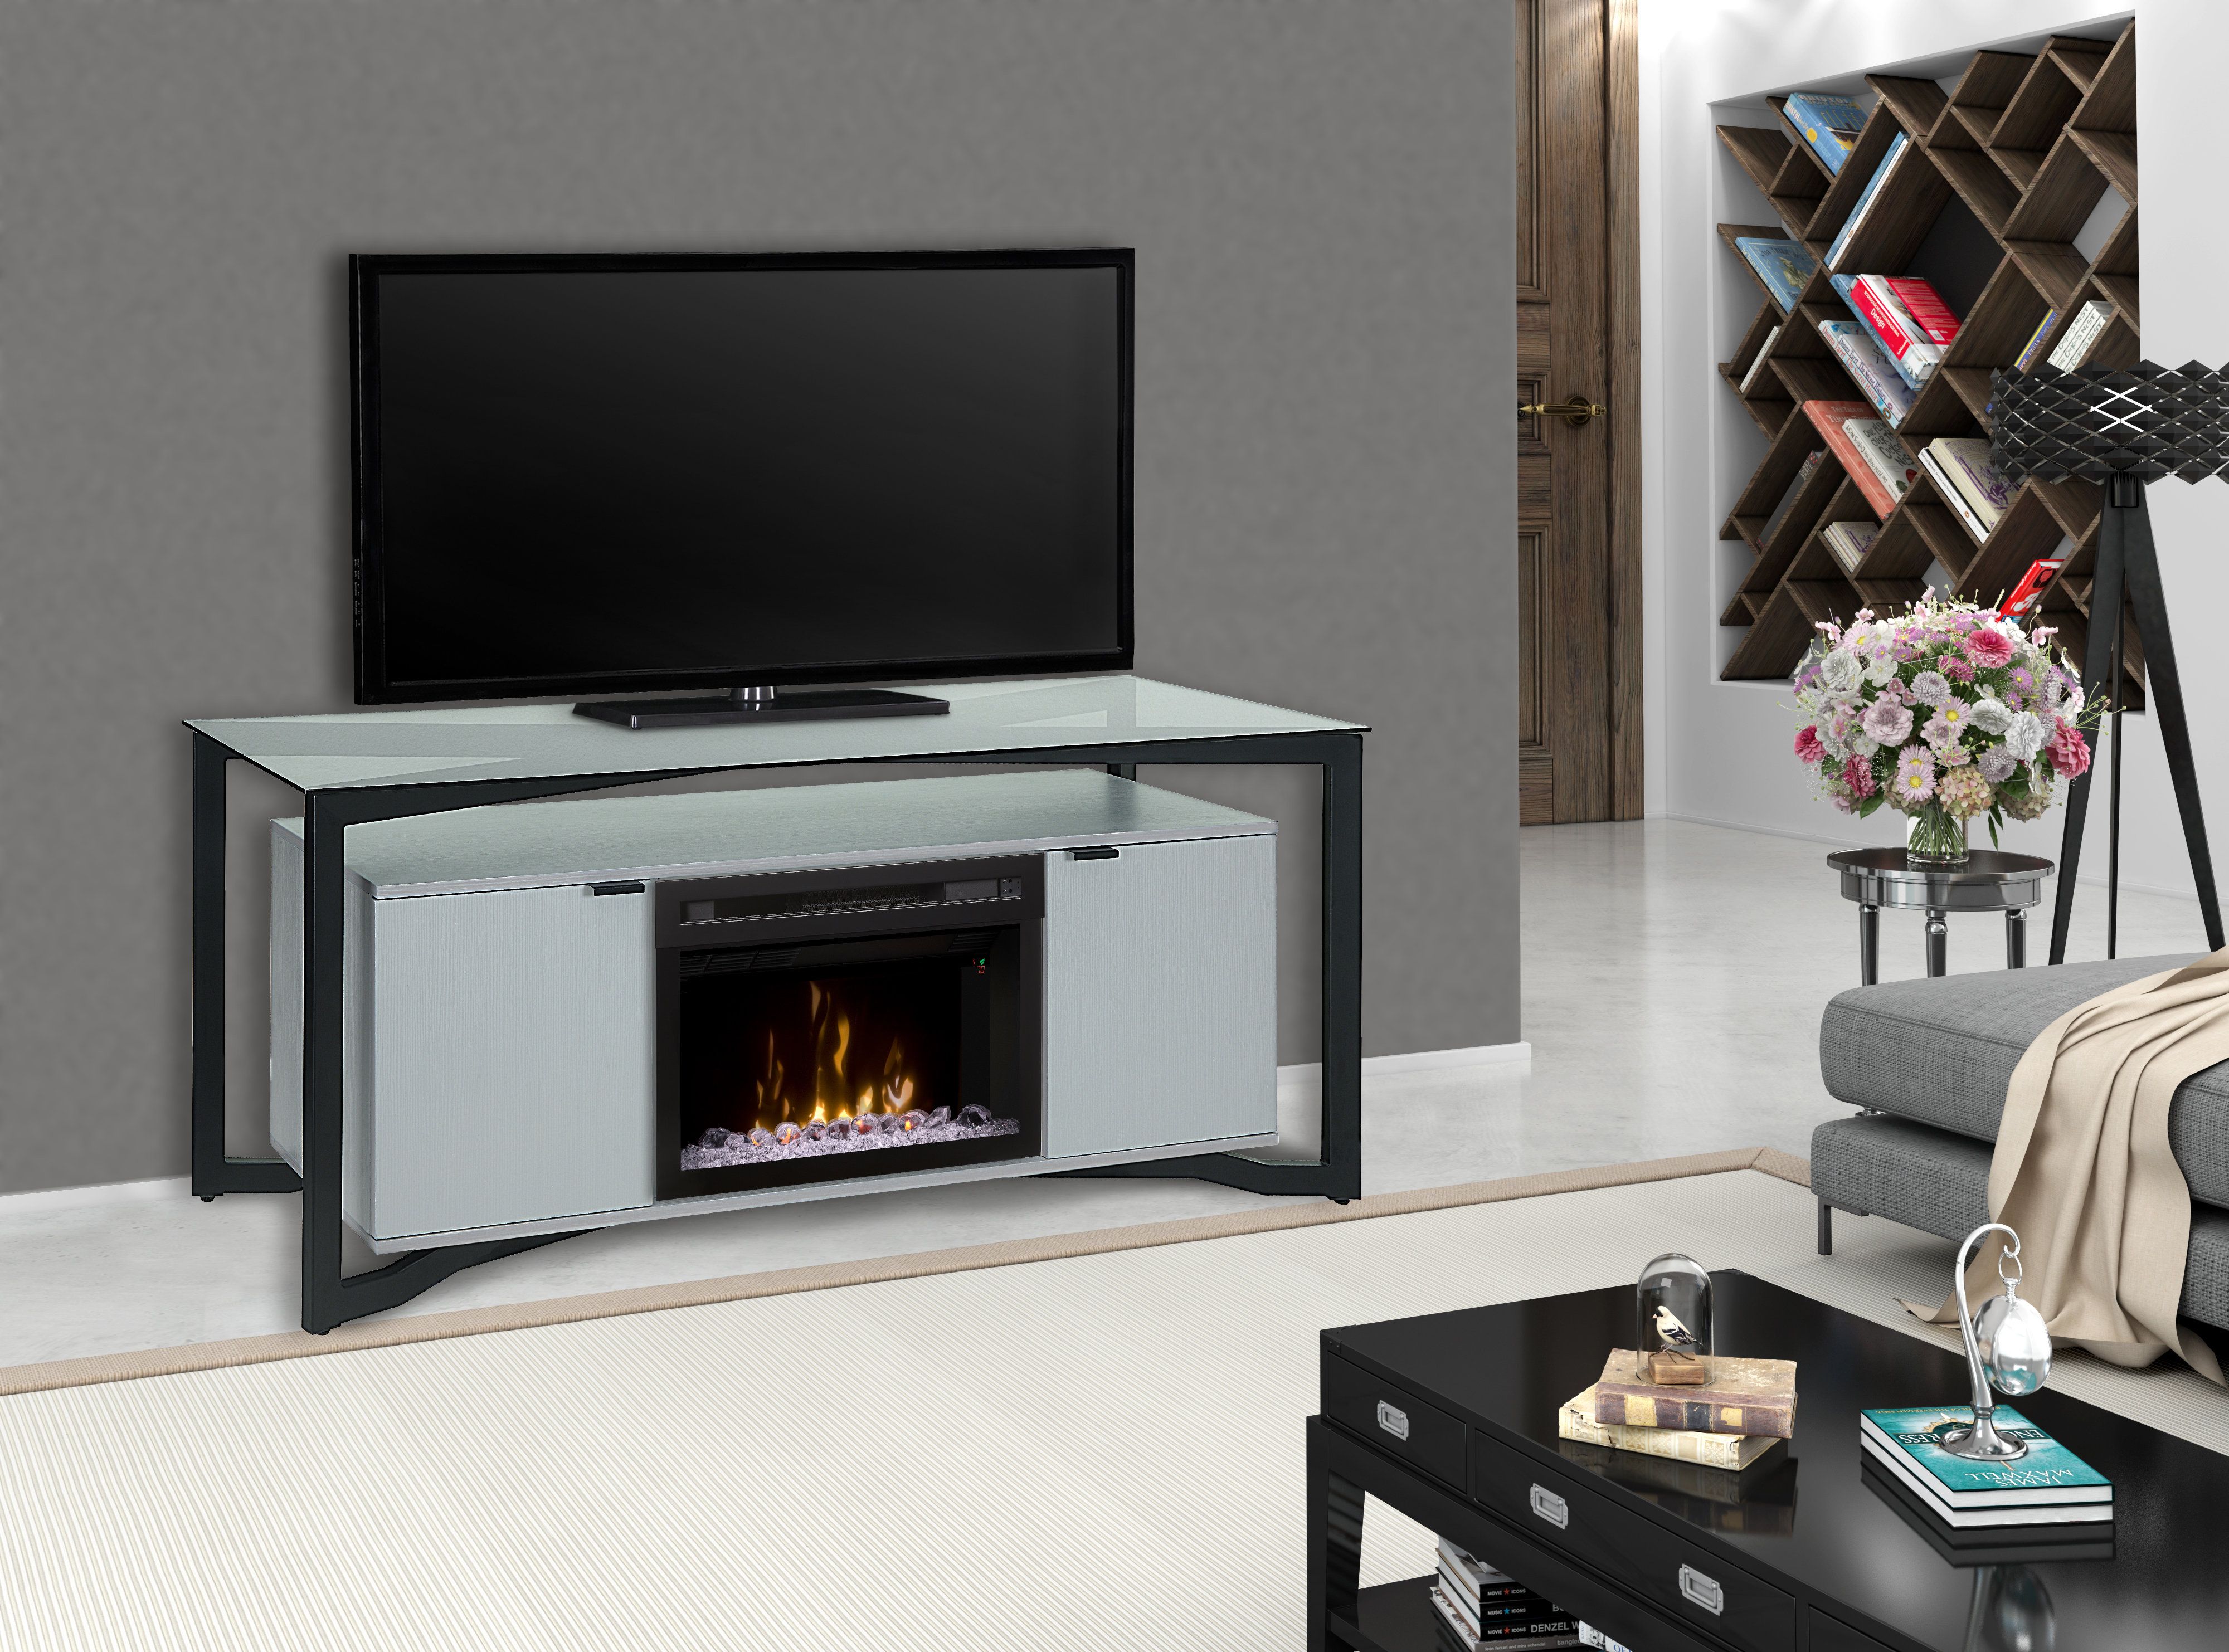 70 Inch And Larger Fireplace Tv Stands You'll Love | Wayfair With Regard To Wyatt 68 Inch Tv Stands (View 23 of 30)